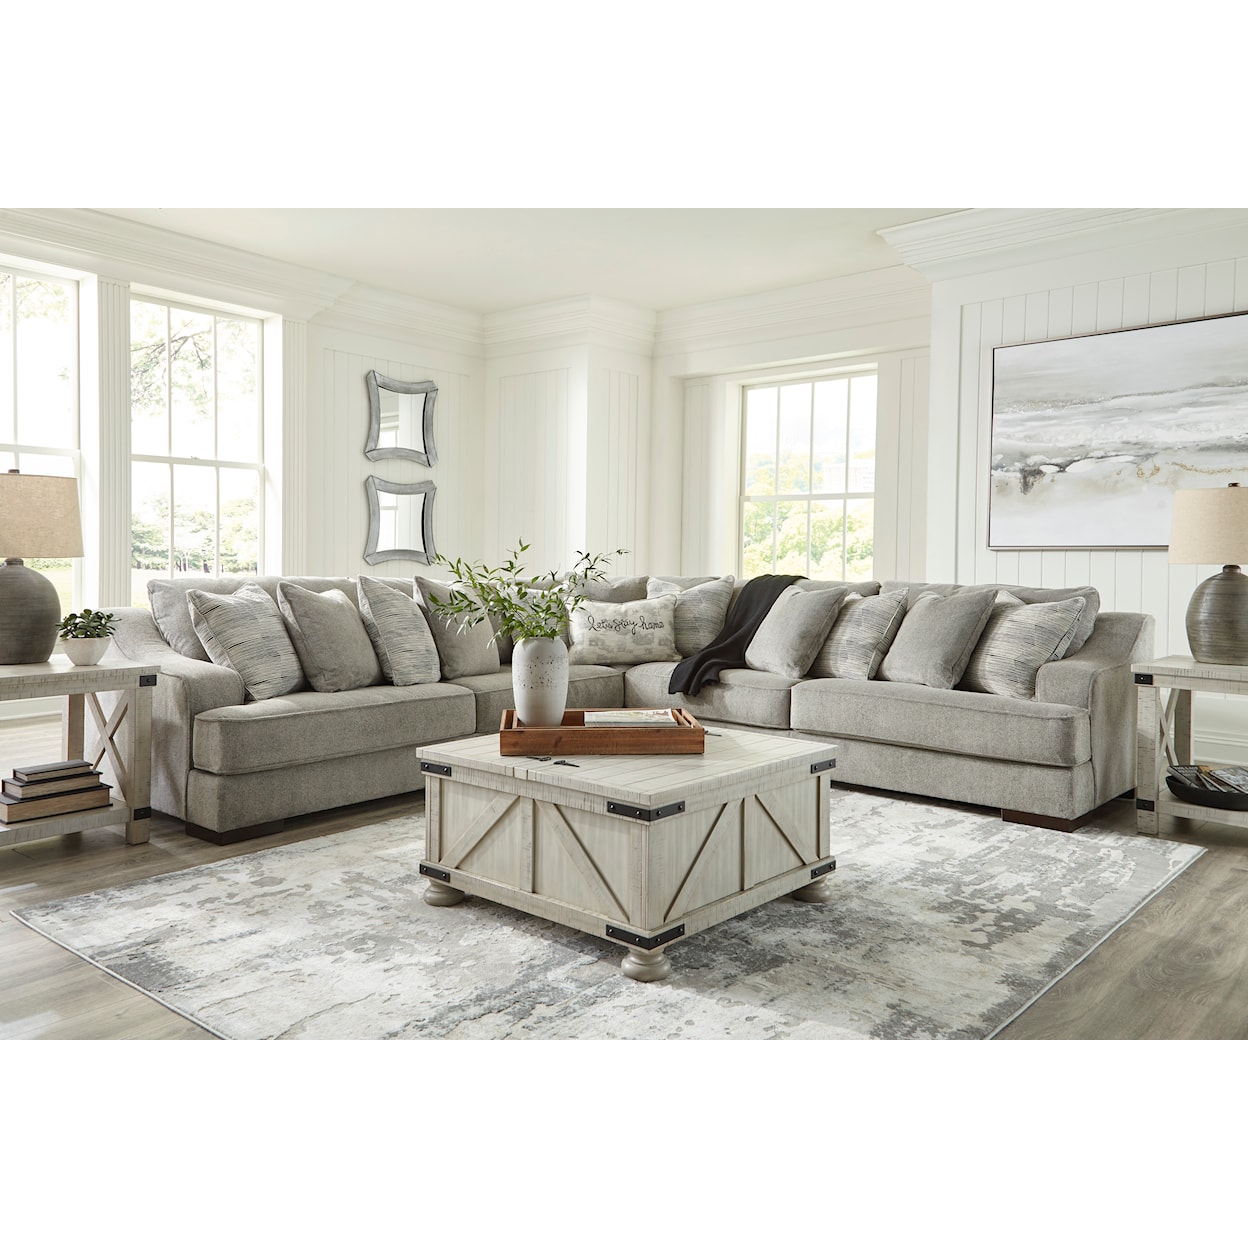 Signature Design by Ashley Furniture Bayless 3-Piece Sectional Sofa